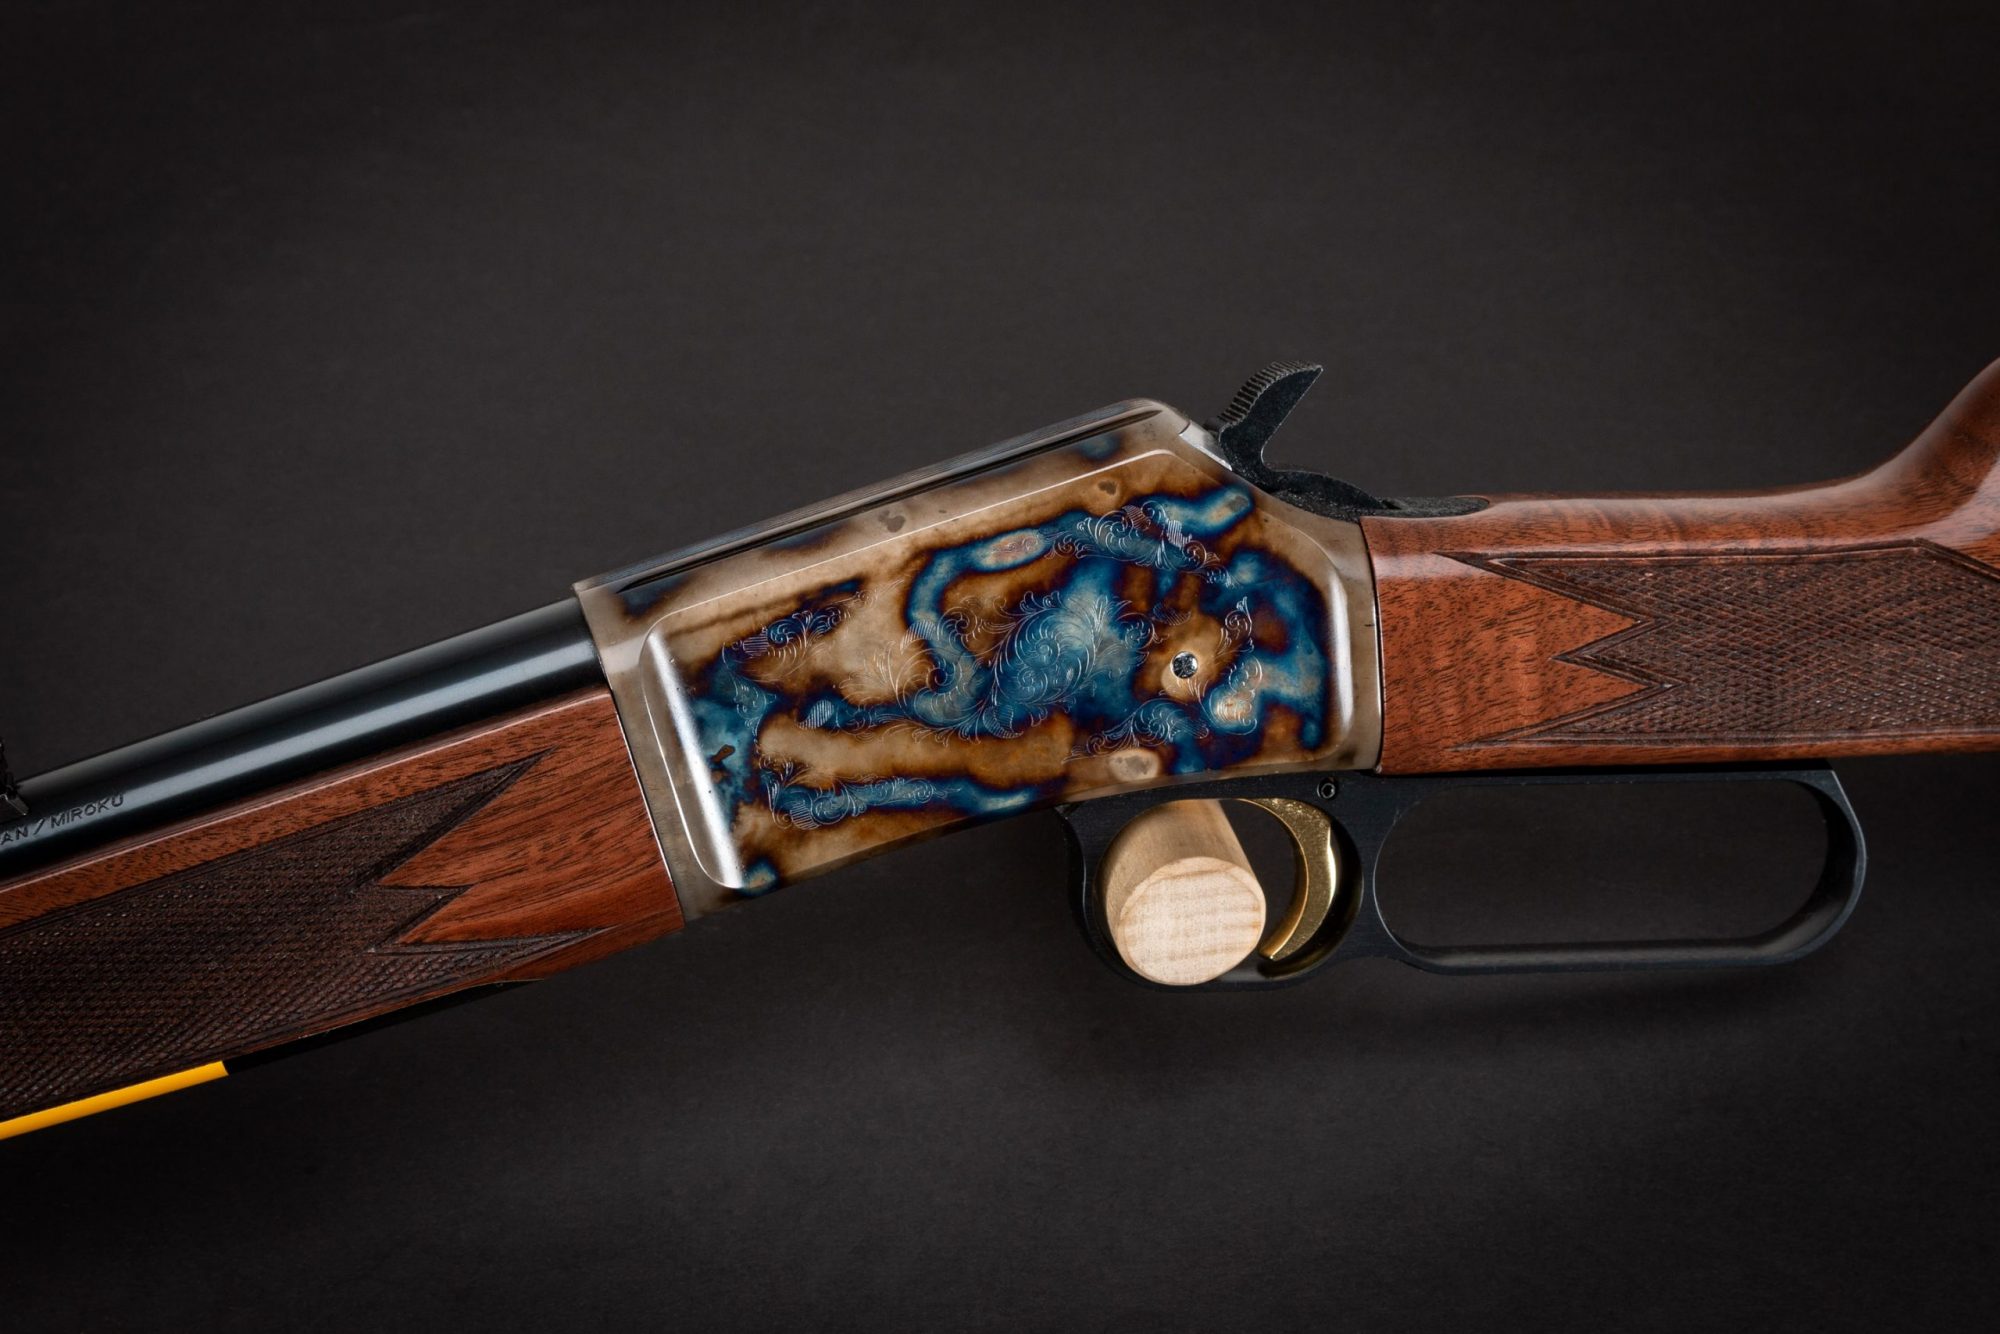 Photo of a color case hardened Browning BL-22 Field II rifle, featuring bone charcoal color case hardening by Turnbull Restoration of Bloomfield, NY